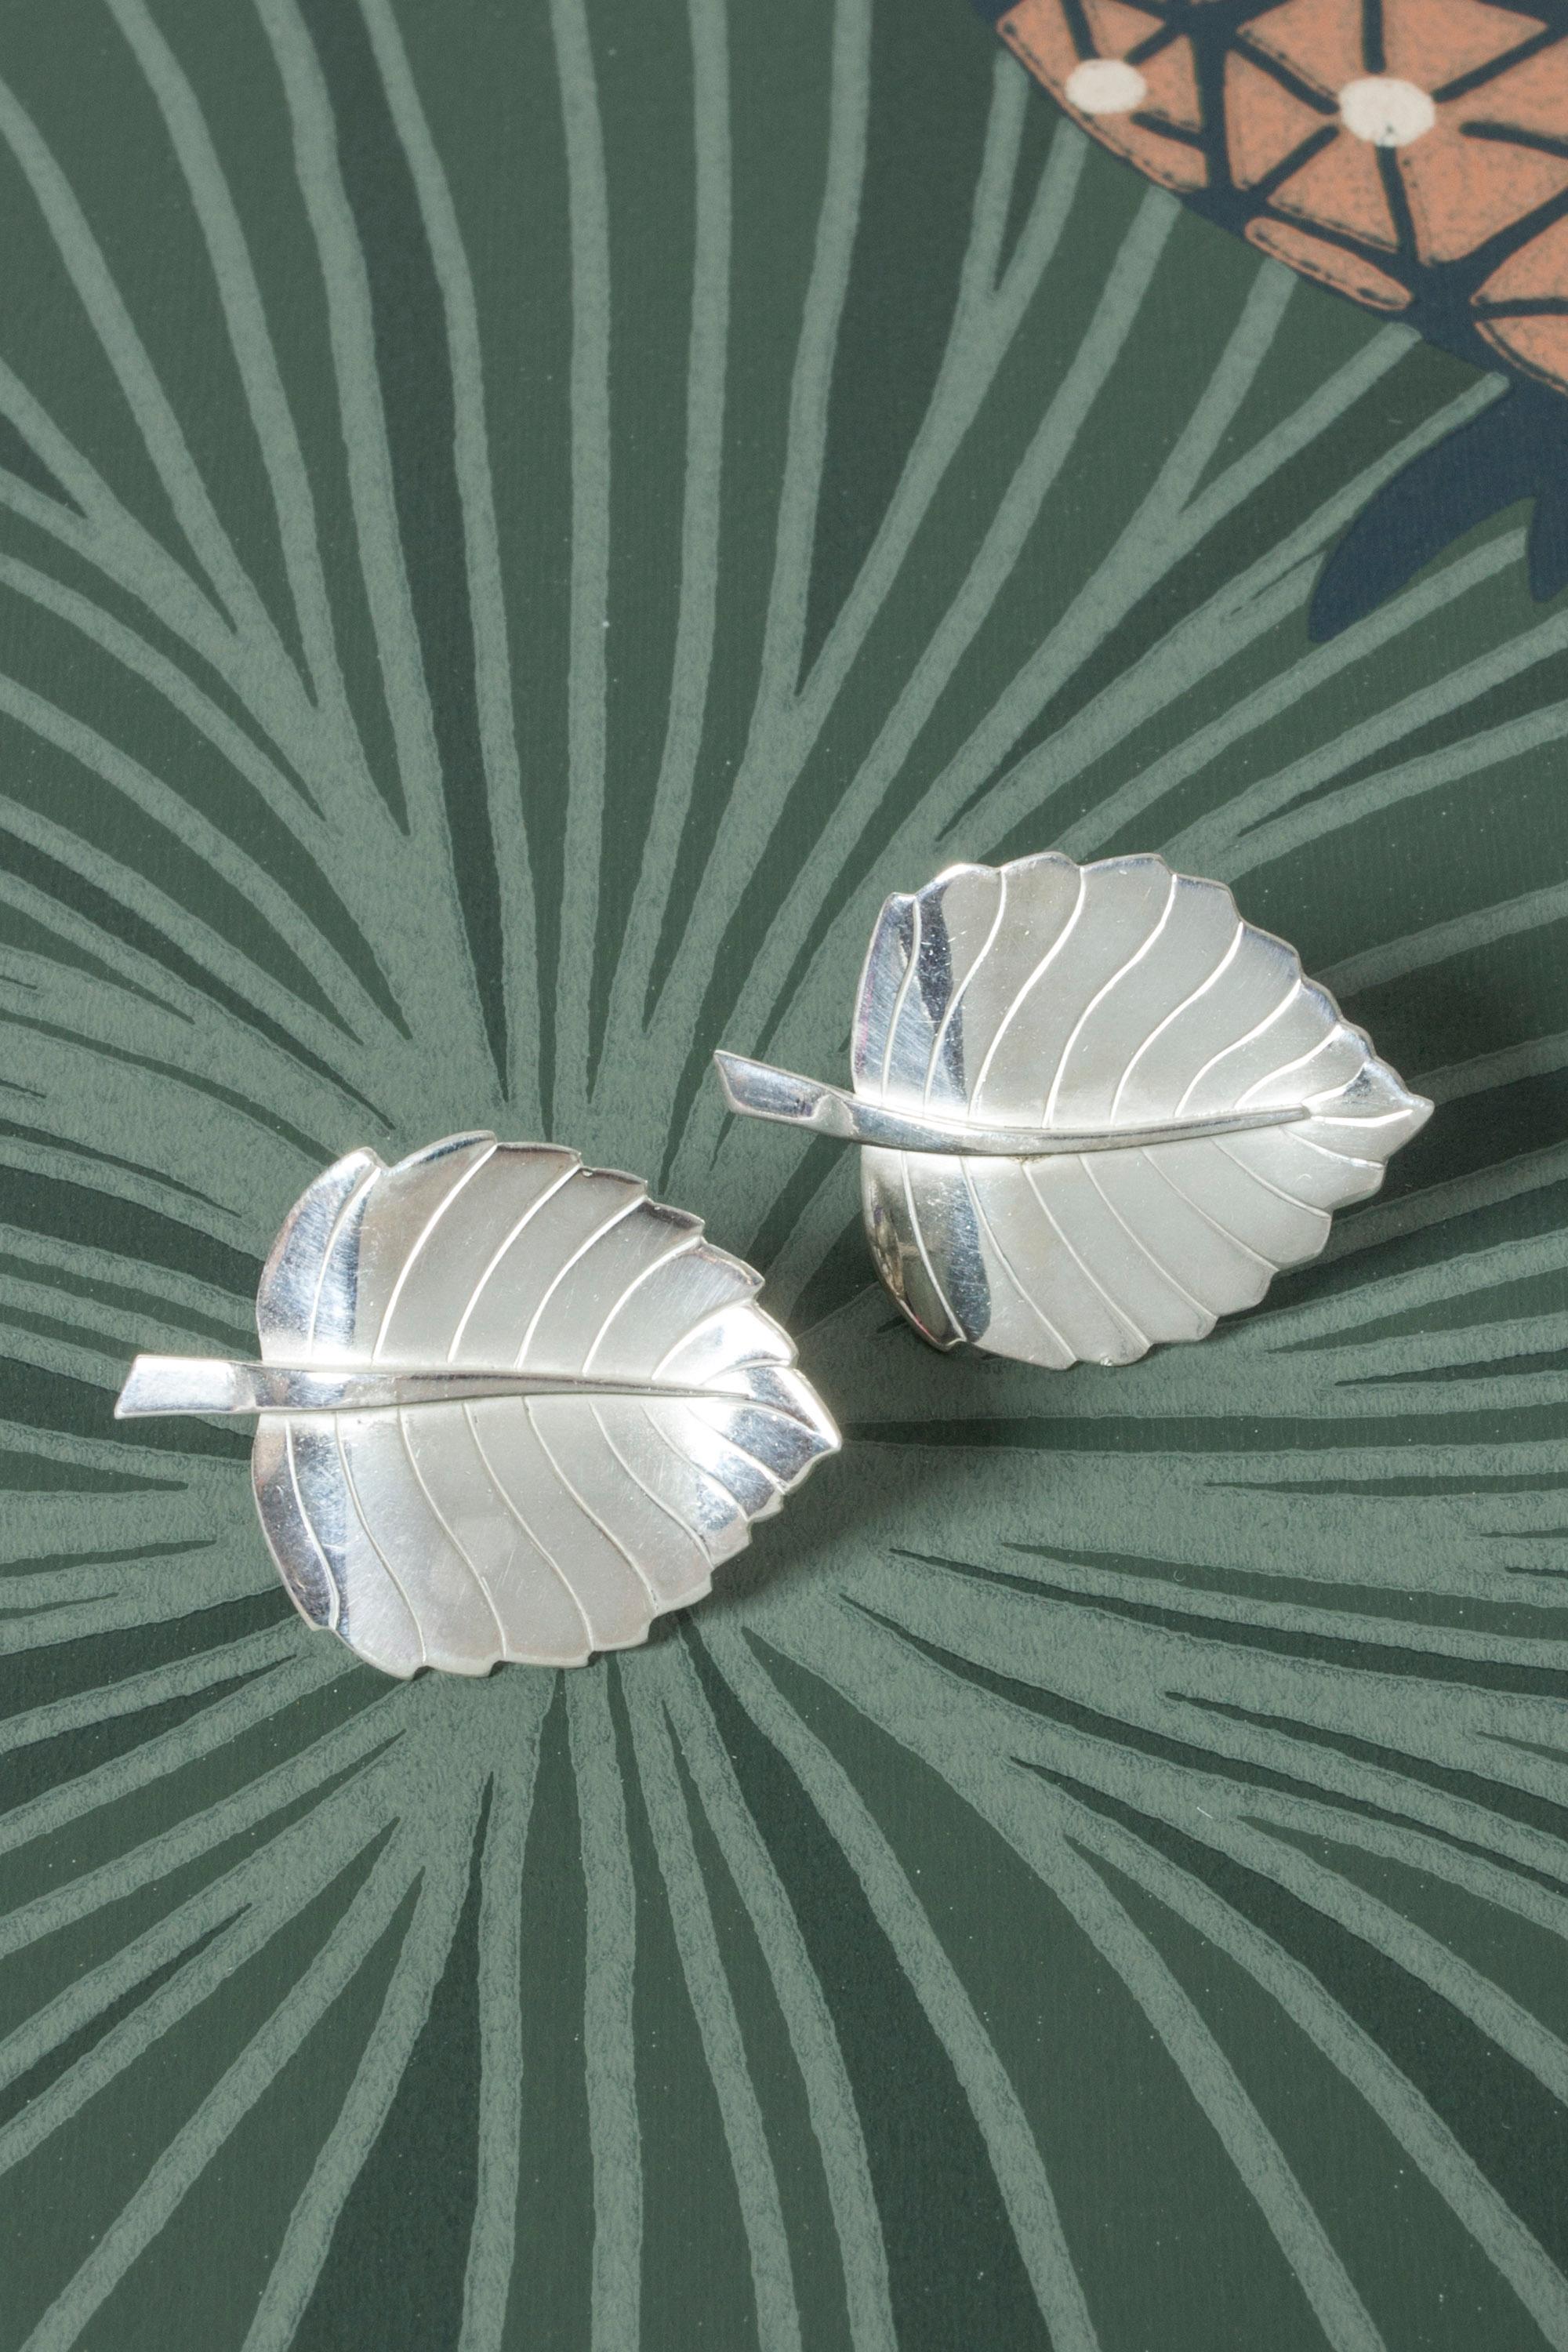 Pair of amazing silver earrings by Sigurd Persson, in the form of large leaves. Elegantly made with attention to detail in the veins and scalloped edges.